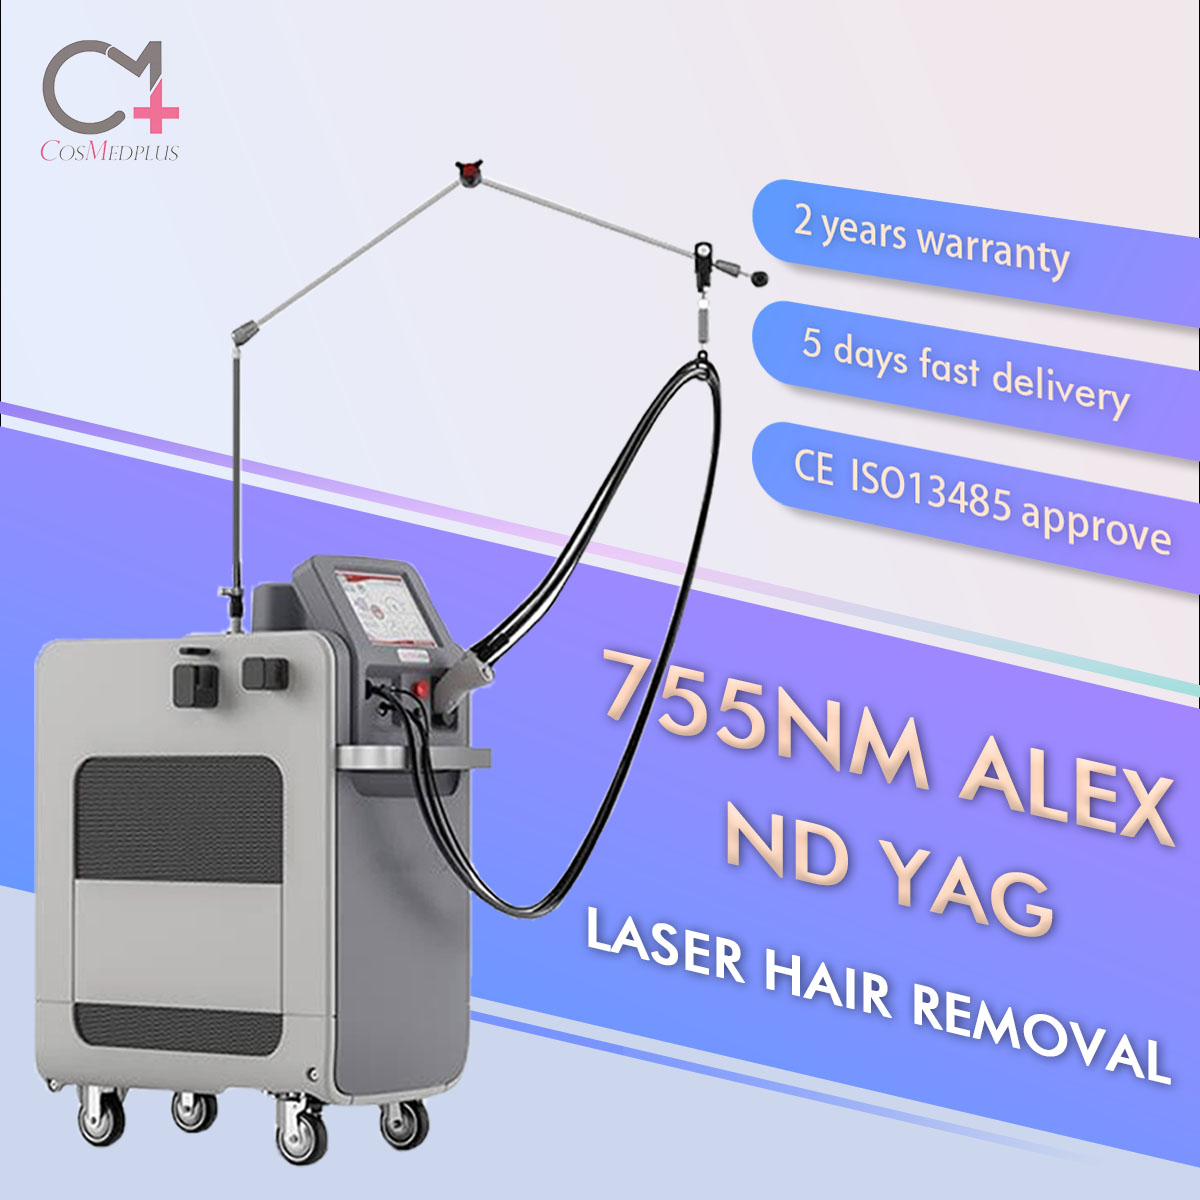 Quality Inspection for Laser Nd Yag Portable Machine - 1064NM ND YAG Gentle Laser Hair Removal Machine Max Price CanDela 755NM Alexandrite Laser  – Huacheng Taike